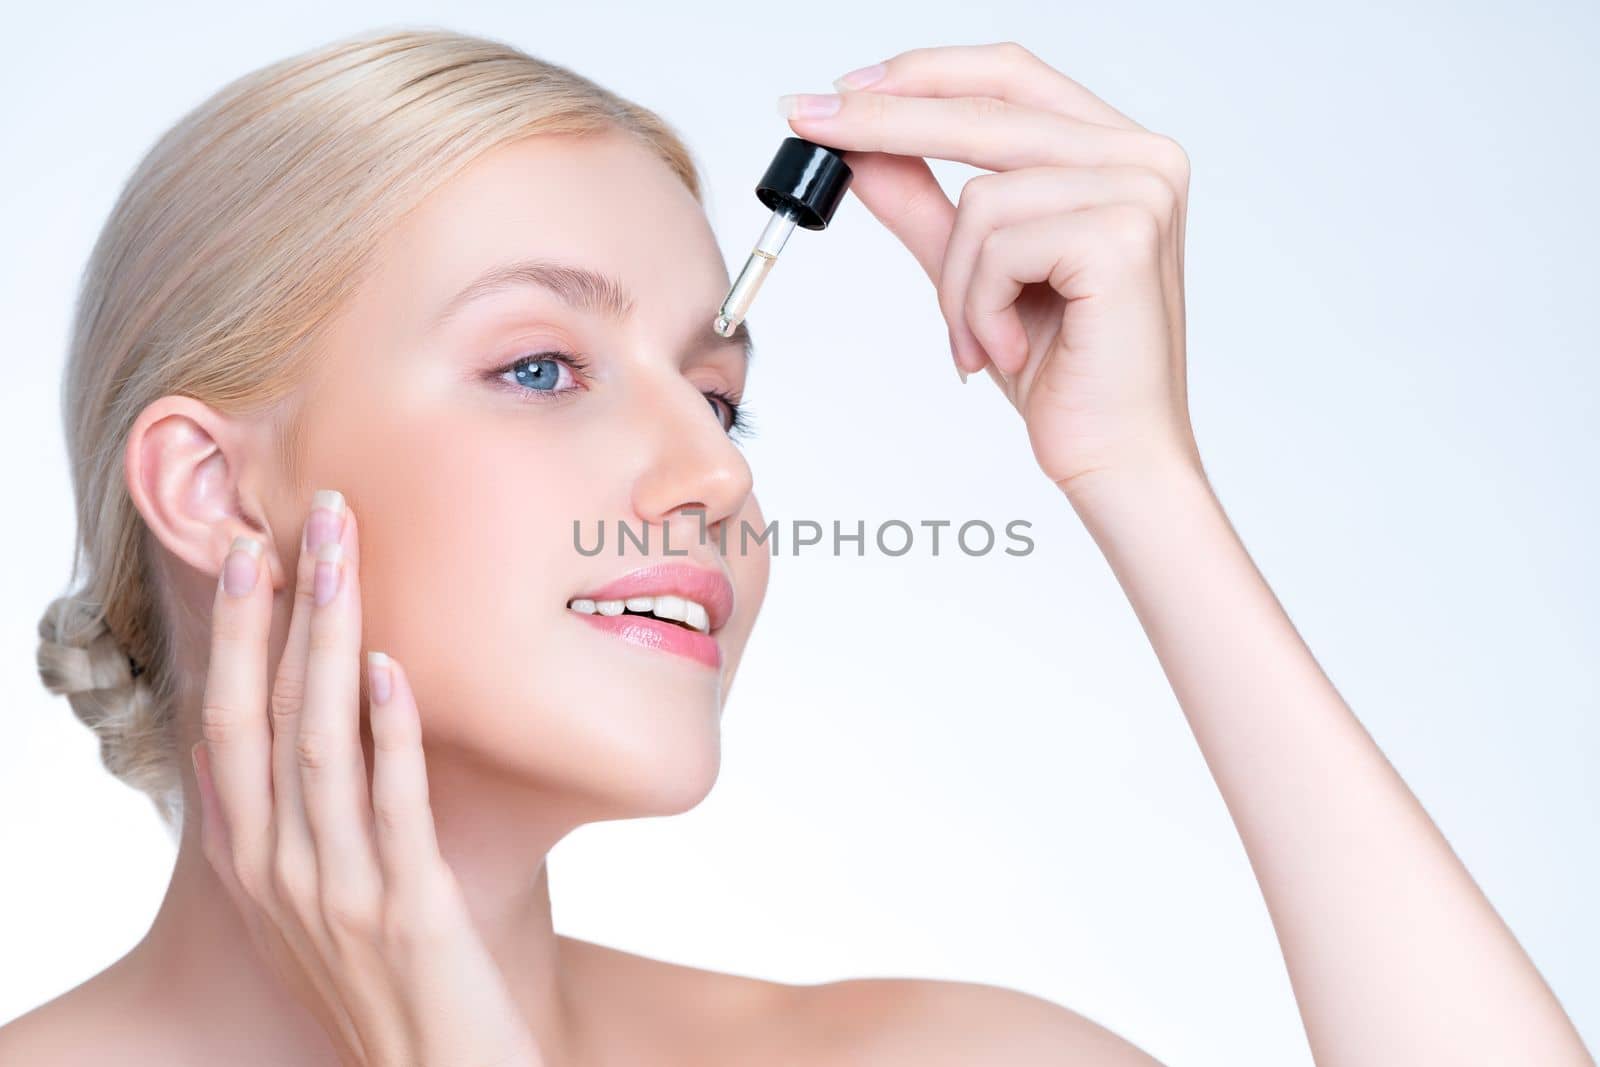 Closeup personable portrait of beautiful woman applying essential oil bottle for skincare product. Cannabis extracted CBD oil dropper for treatment and cannabinoids concept in isolated background.